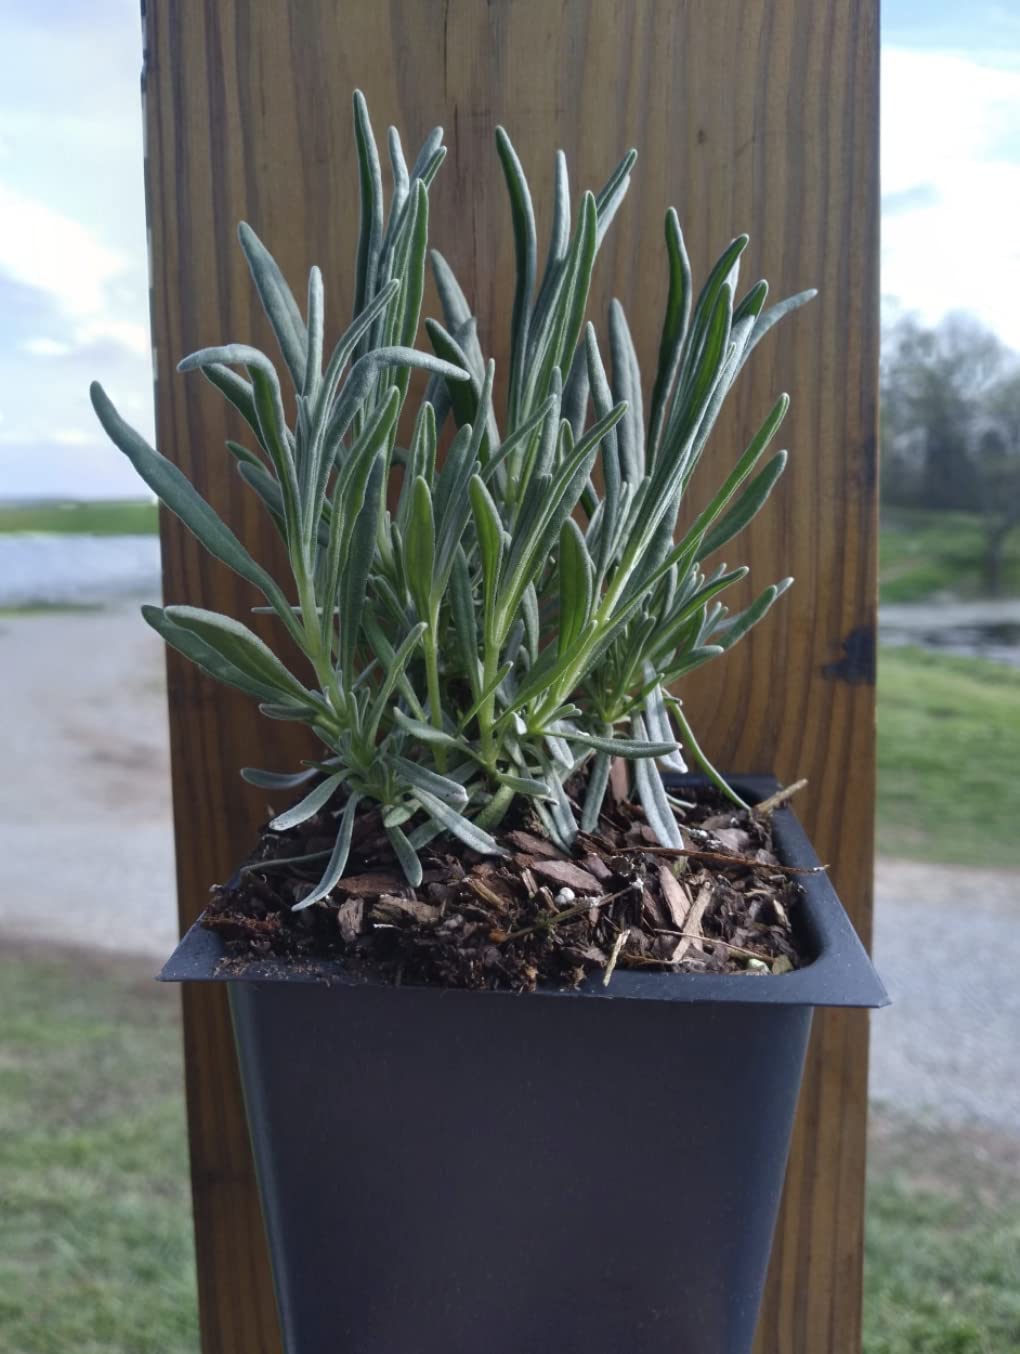 4 Phenomenal Lavender Plants each in a 4 inch container - image 1 of 3